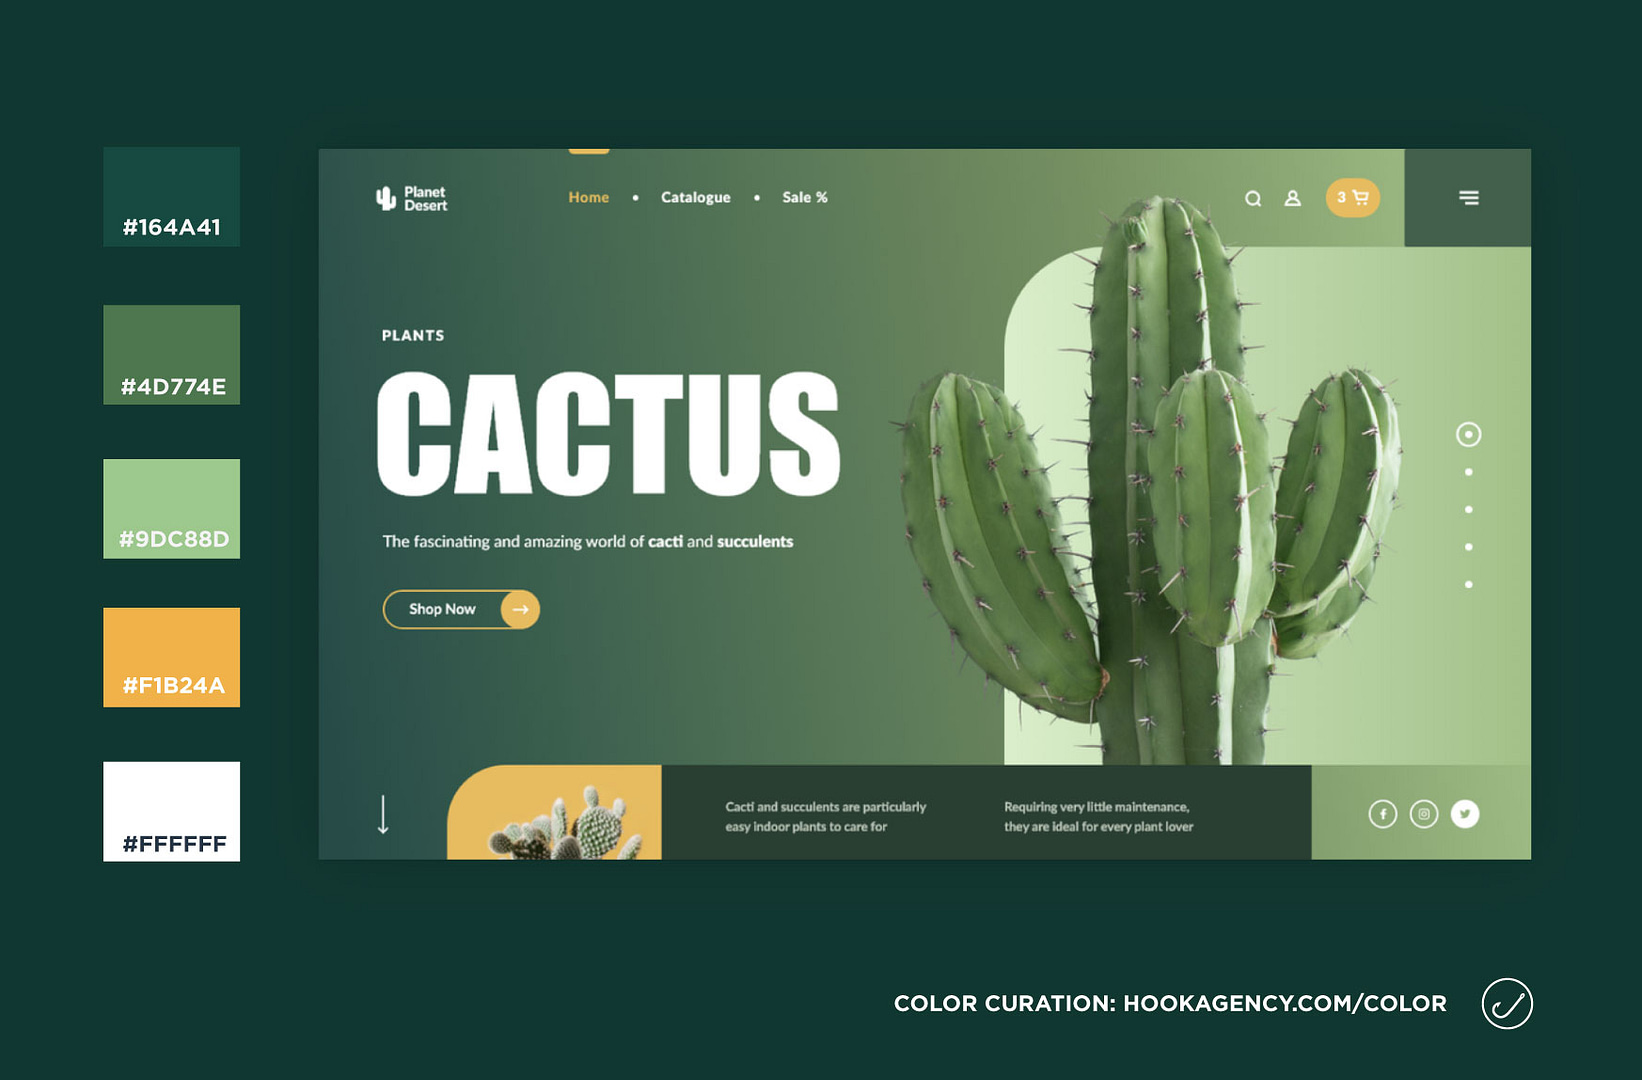 Cactus Greenery Yellow Website Design Color Scheme Inspiration 2021 Current Year 1 